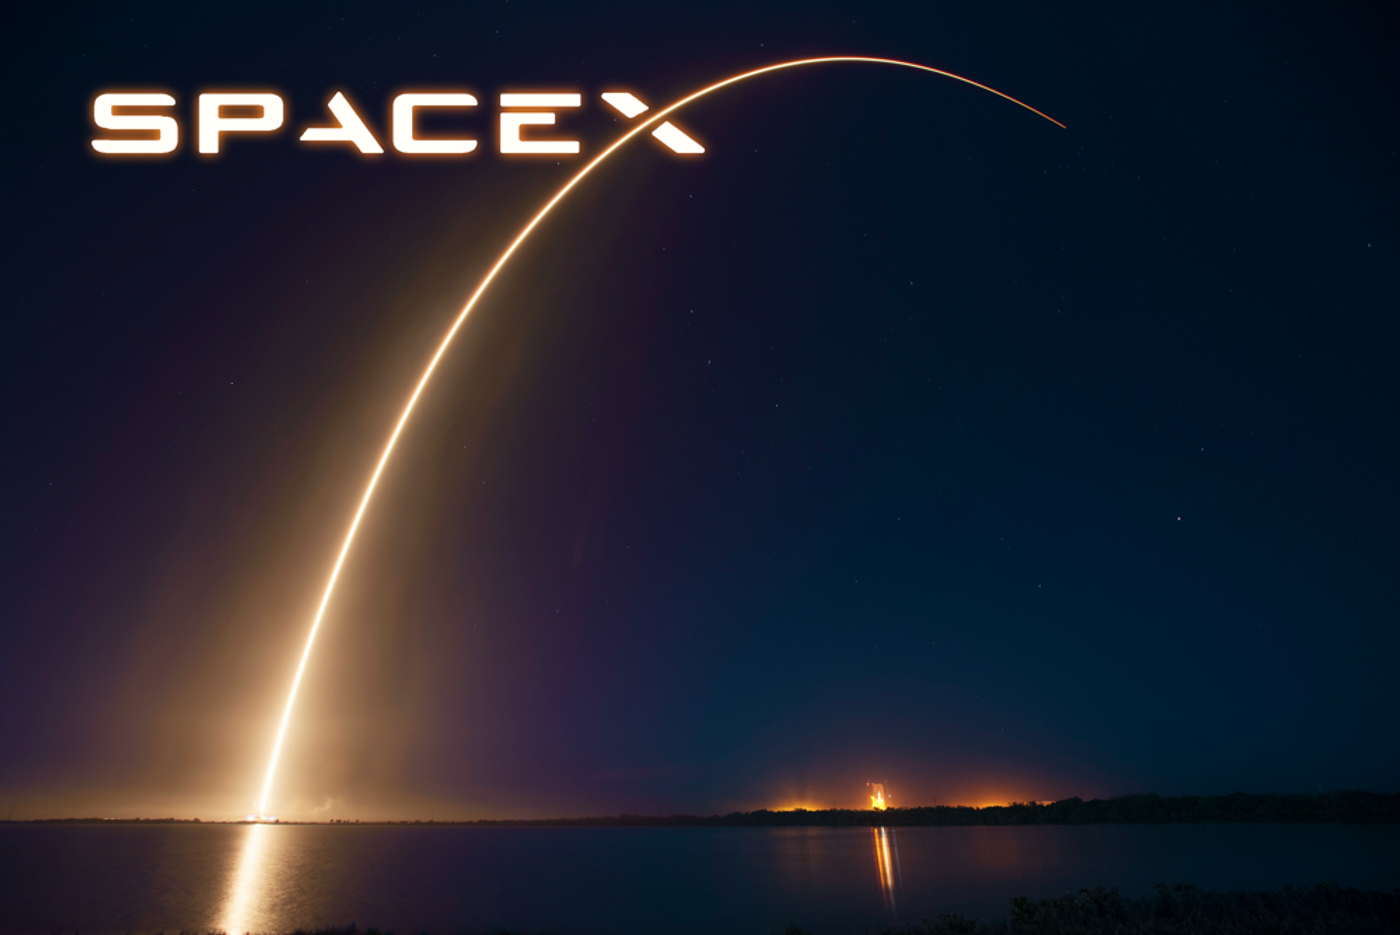 SpaceX plans to attempt a Falcon 9 rocket launch on January 14th following schedule delays.